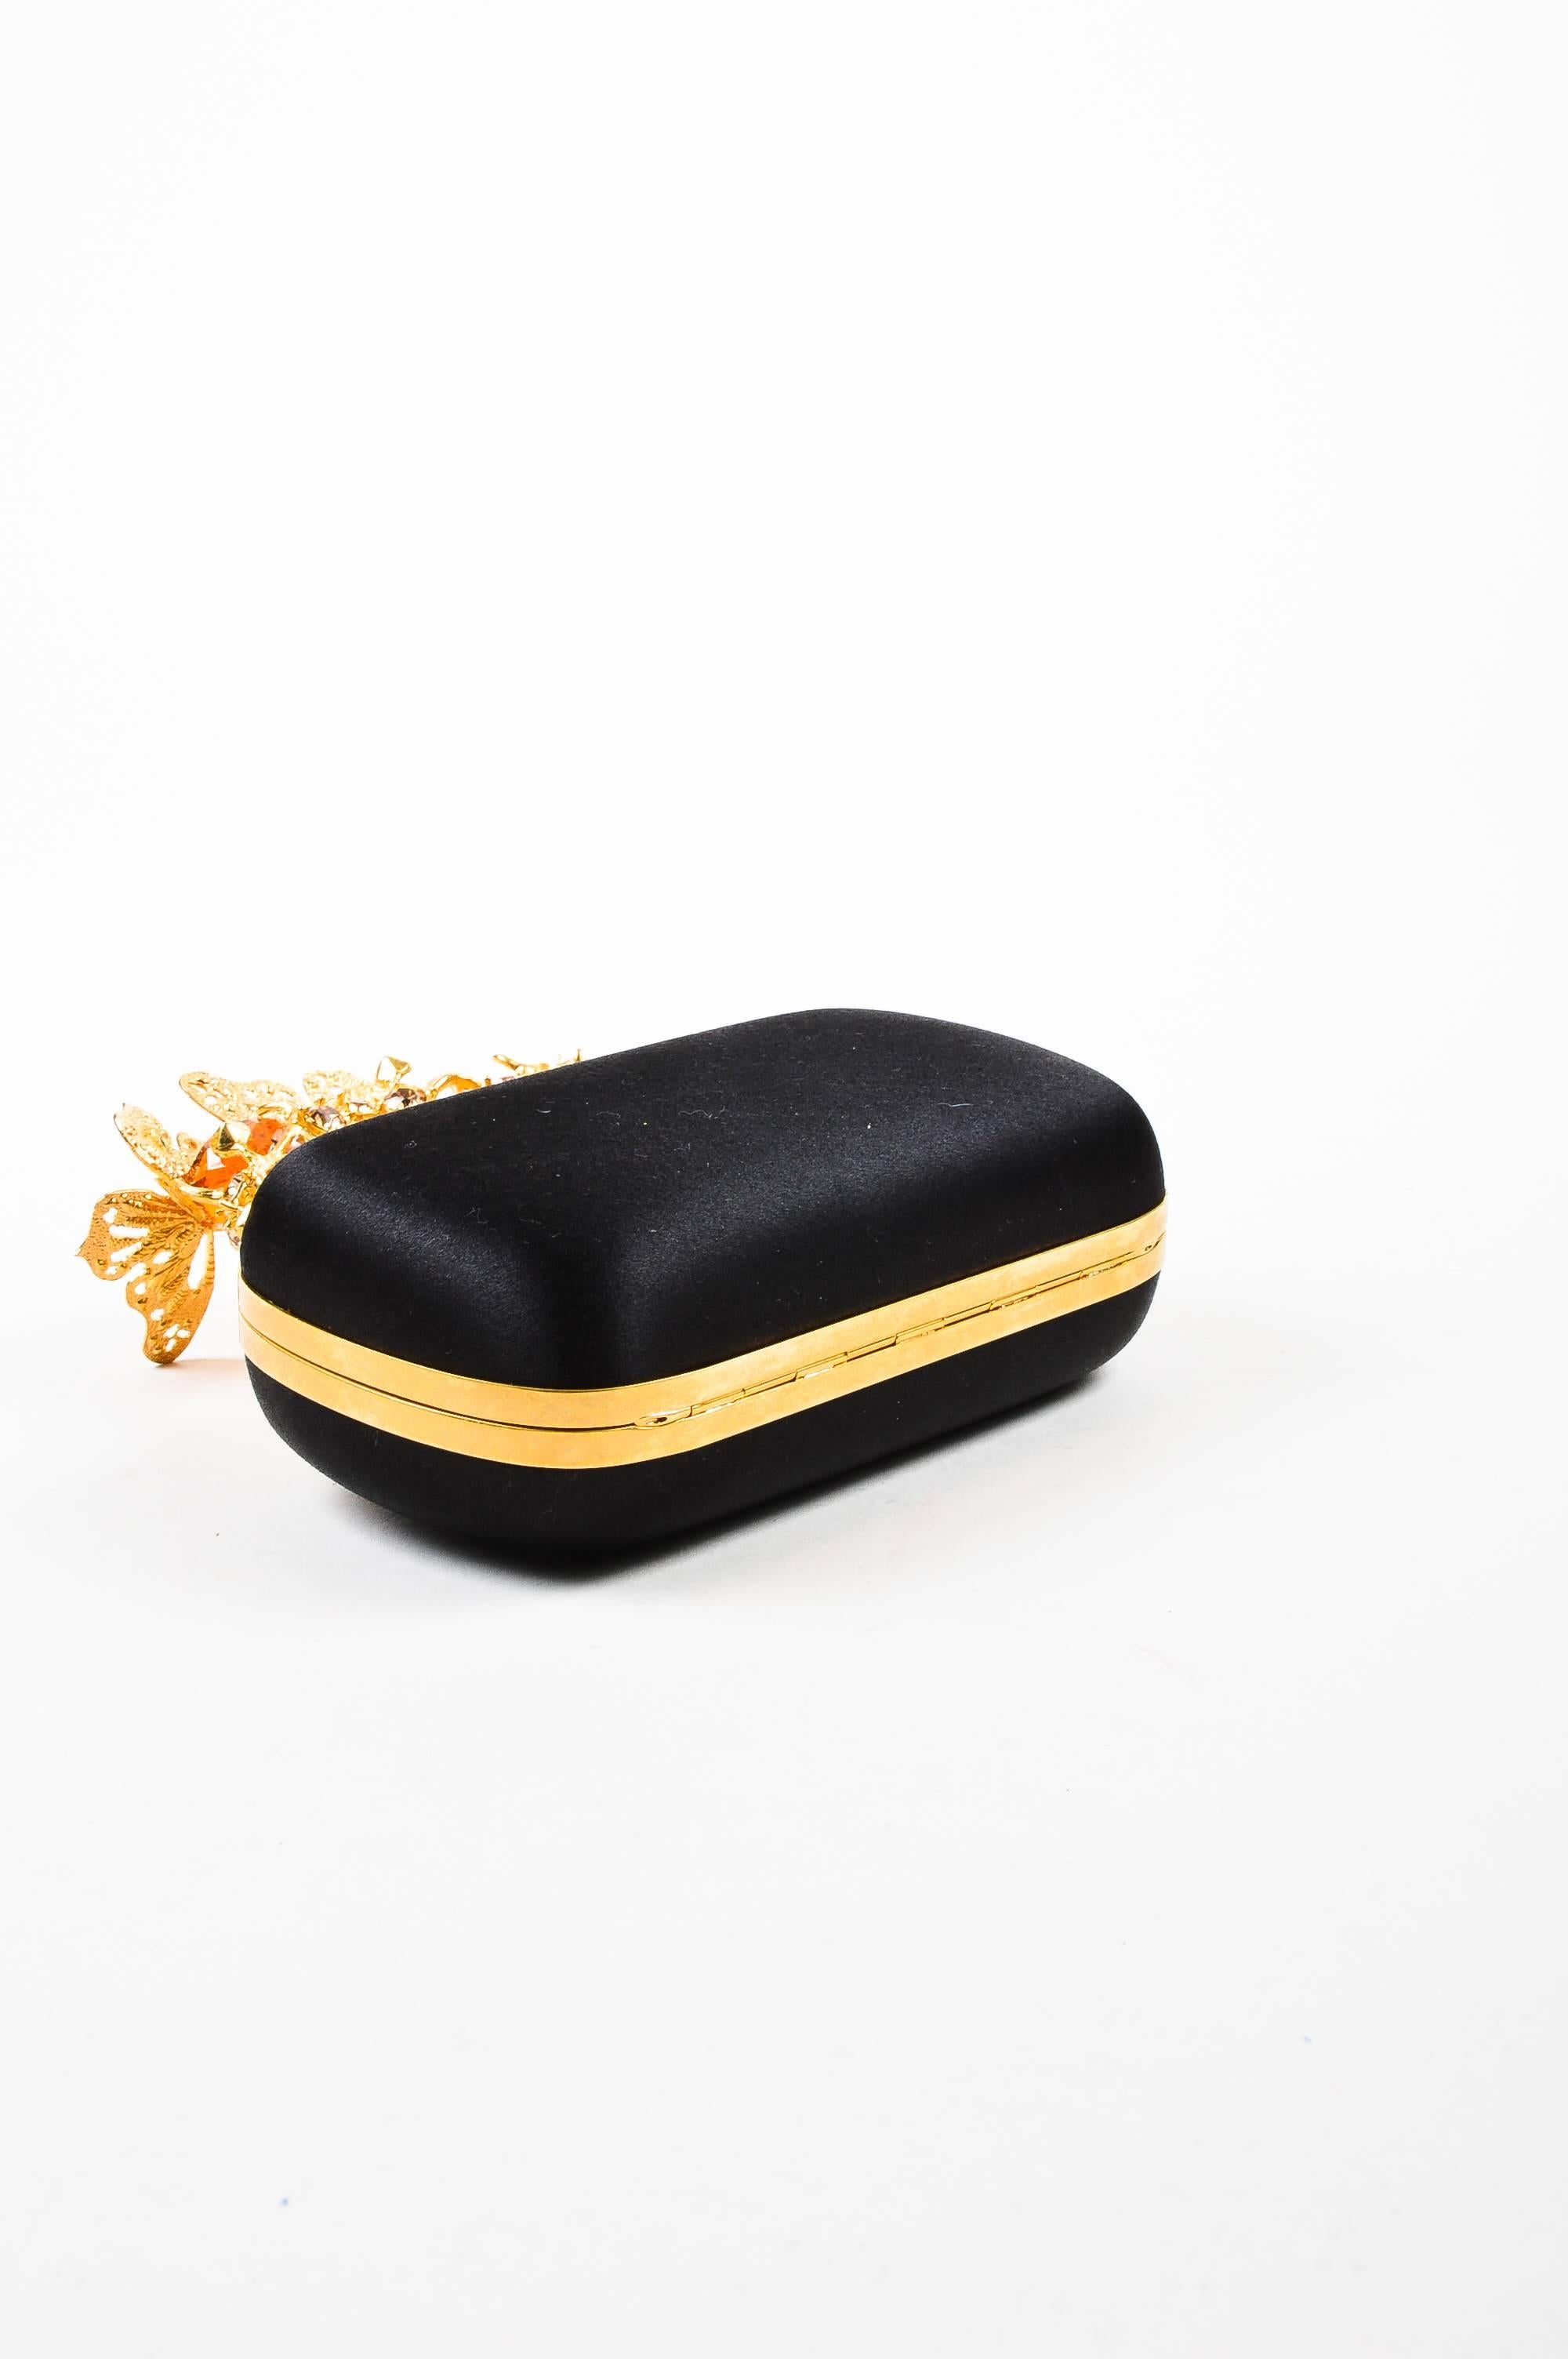 Alexander McQueen Black Satin Gold Tone Crystal Butterfly Knuckle Clutch In Good Condition For Sale In Chicago, IL